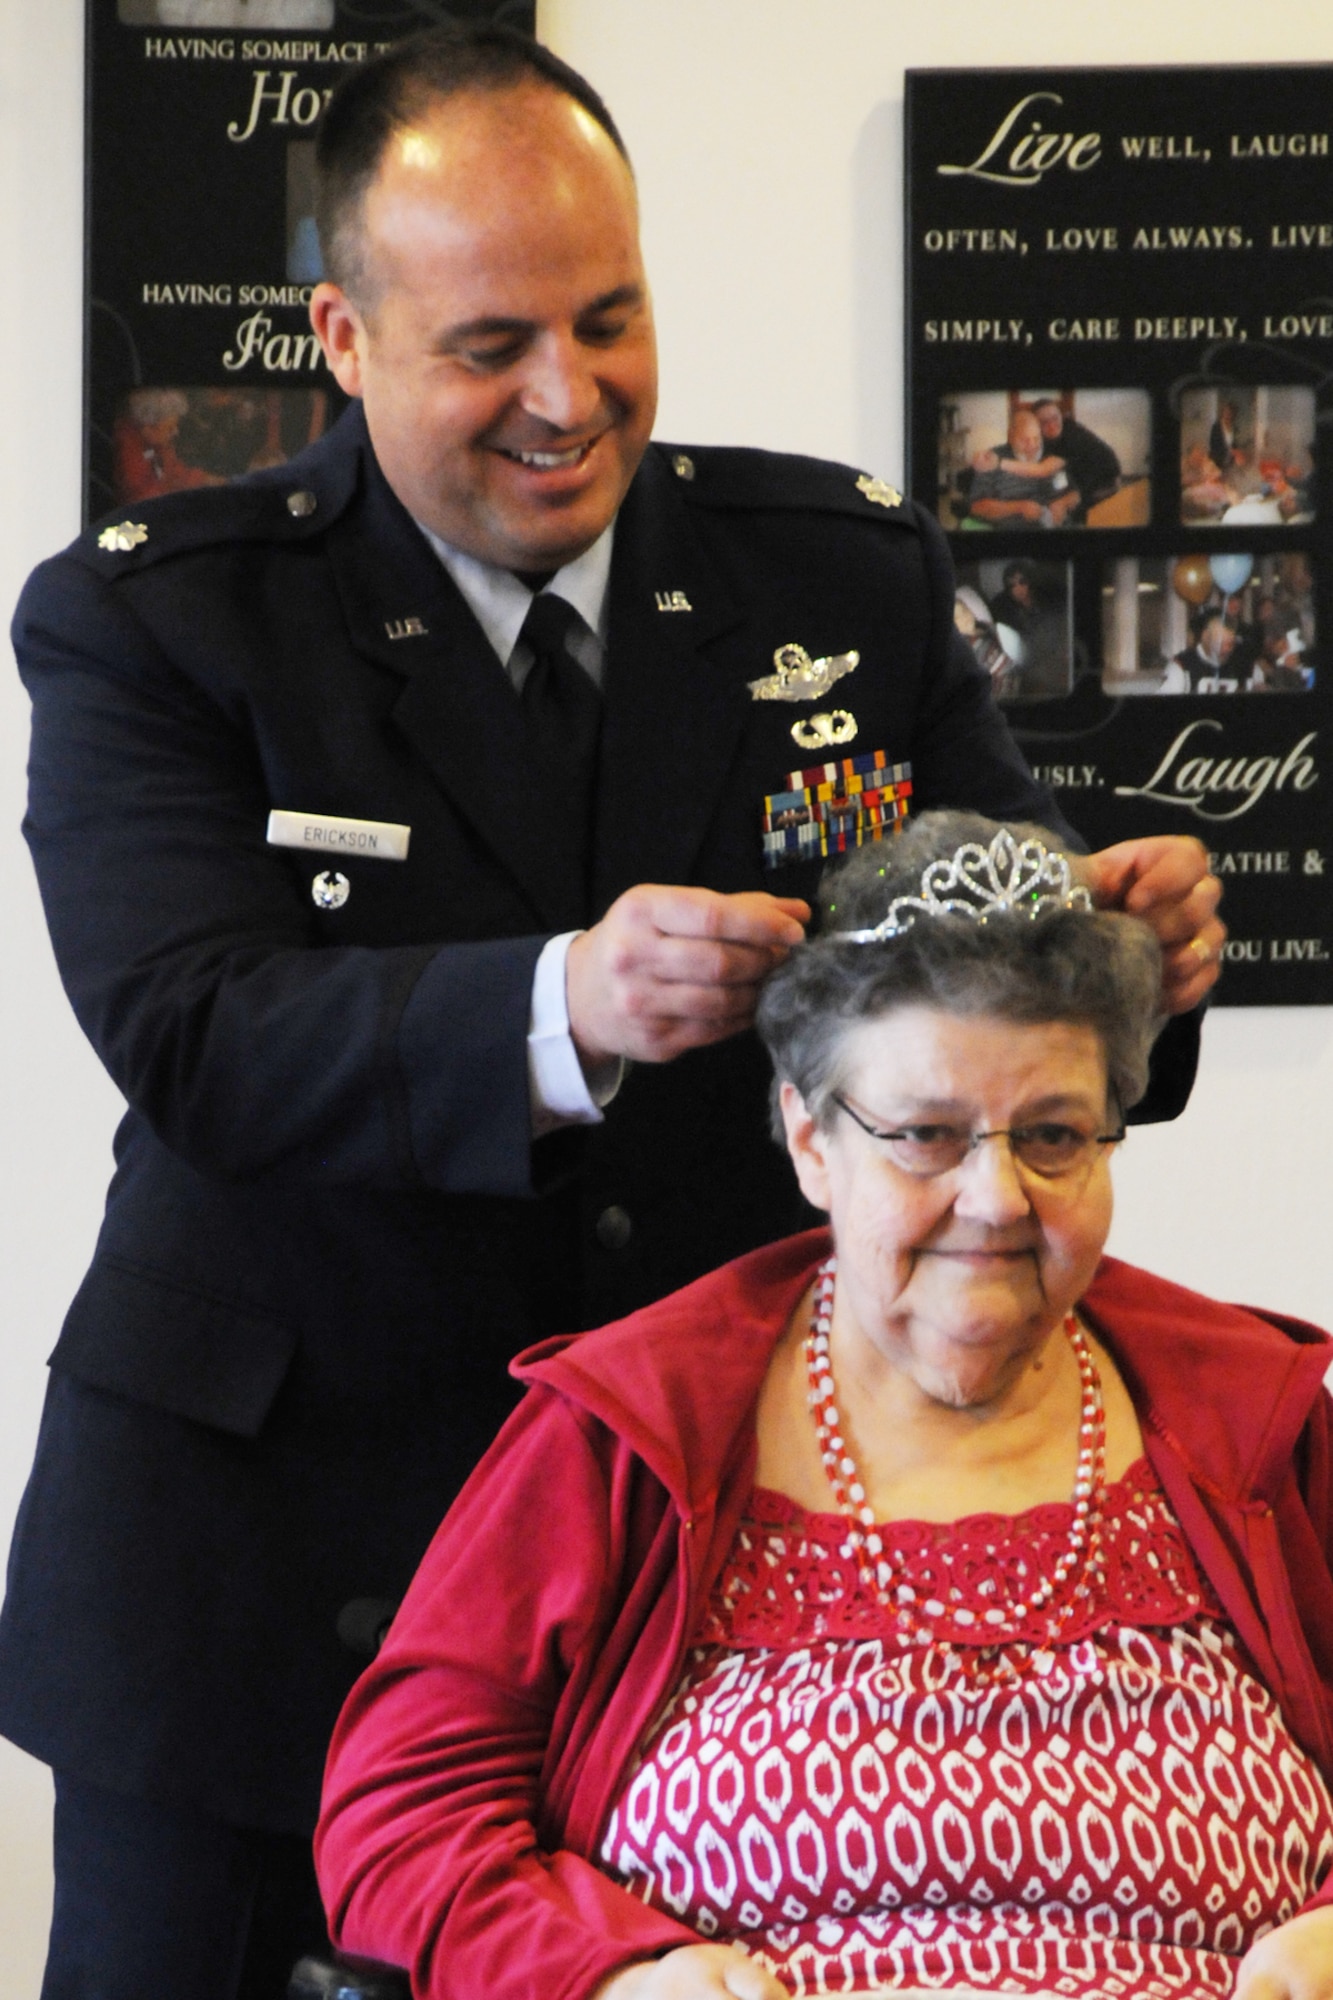 Lt. Col. Robert Erickson, State Director of Air Operations, crowns  Mrs. Joanne Hollenbeak the 2011 Rose Queen.  Members of the Oregon Air National Guard volunteered to help with the 2011 Rose Queen Corenation ceremony at Plum Ridge Marquis Care in Klamath Falls, Ore. April 8, 2011. (U.S. Air Force Photo by Tech.Sgt. Jennifer Shirar, RELEASED)